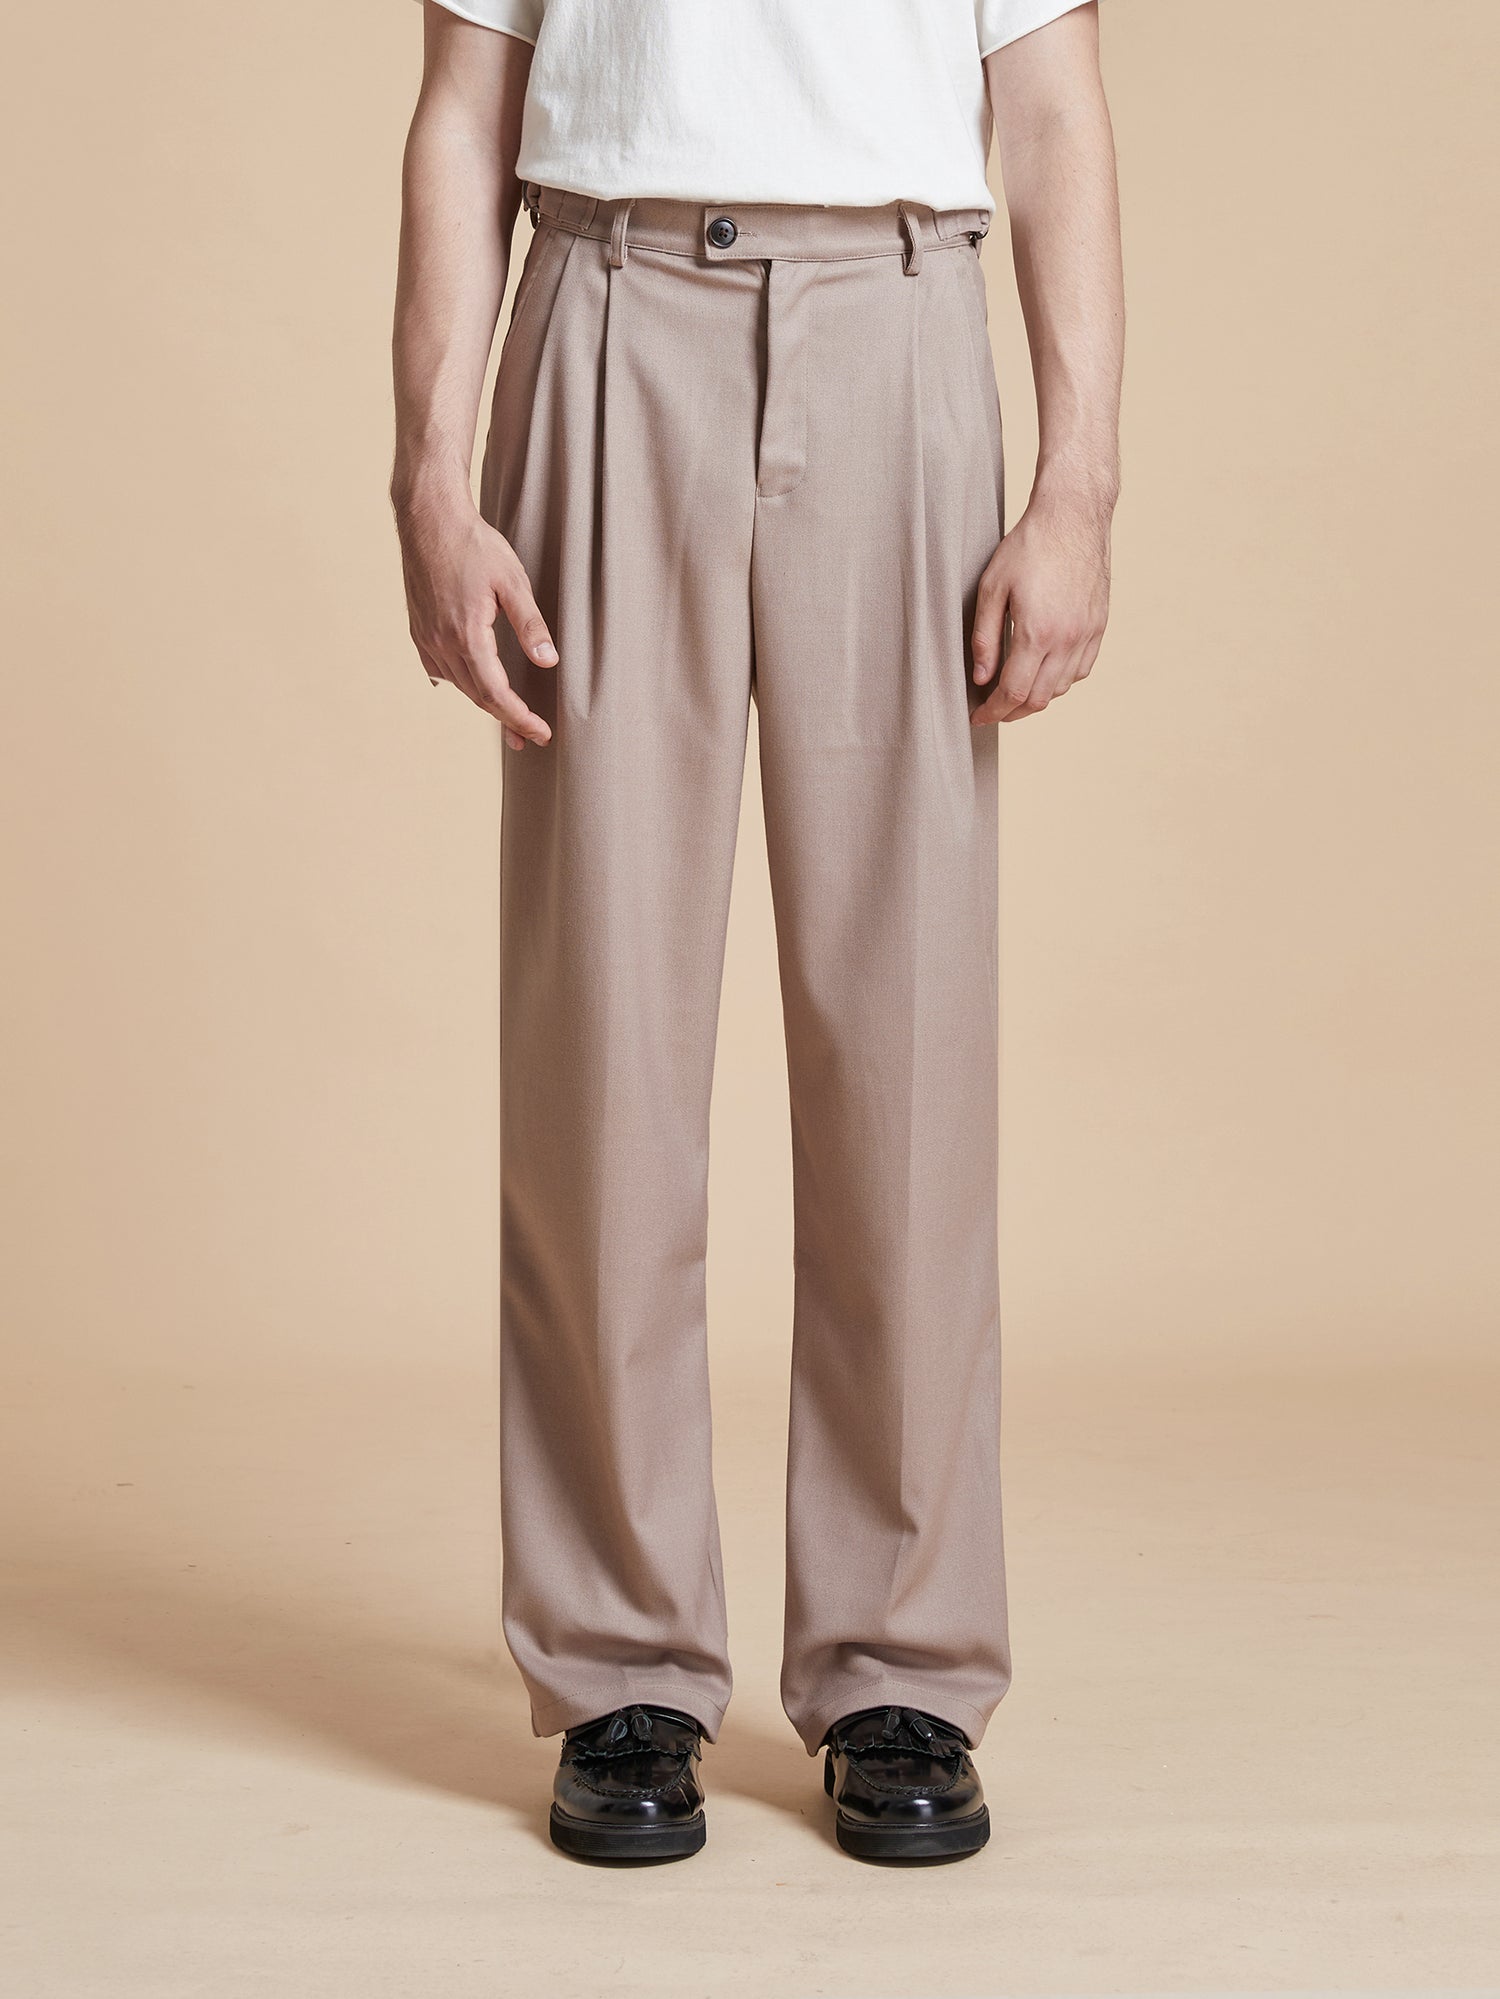 A man wearing a white t-shirt and beige Pleated Trousers with a classic silhouette from Found.